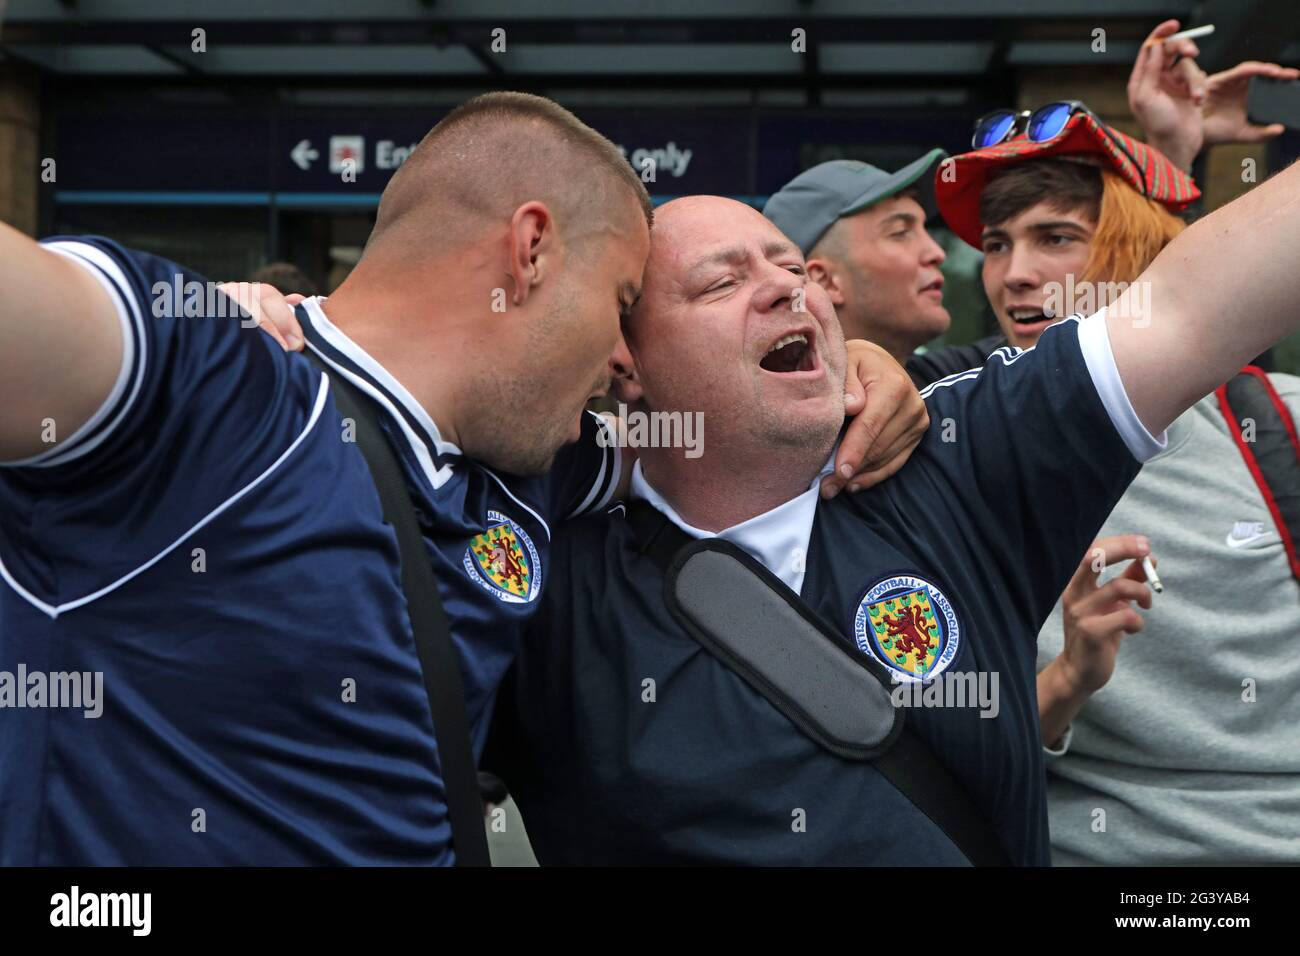 Scotland fans arriving at King's Cross station show their support in London ahead of the UEFA Euro 2020 Group D match between England and Scotland at Wembley Stadium. Picture date: Friday June 18, 2021. Stock Photo